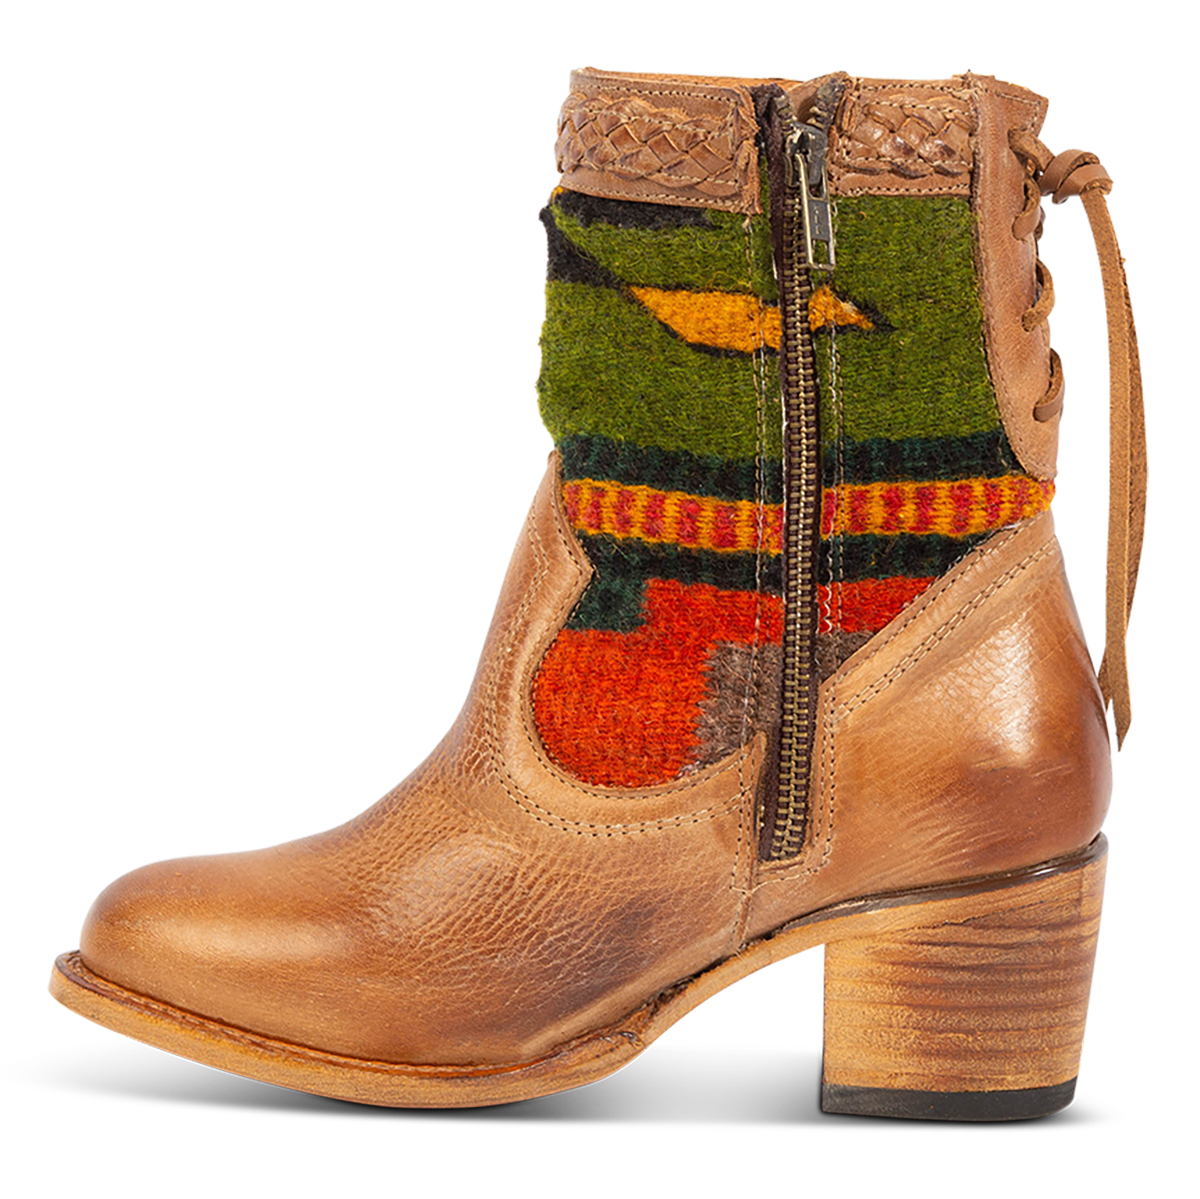 Inside view showing an inside working brass zipper, adjustable leather lacing and multi-colored woven detailing on FREEBIRD women's Songbird tan leather bootie